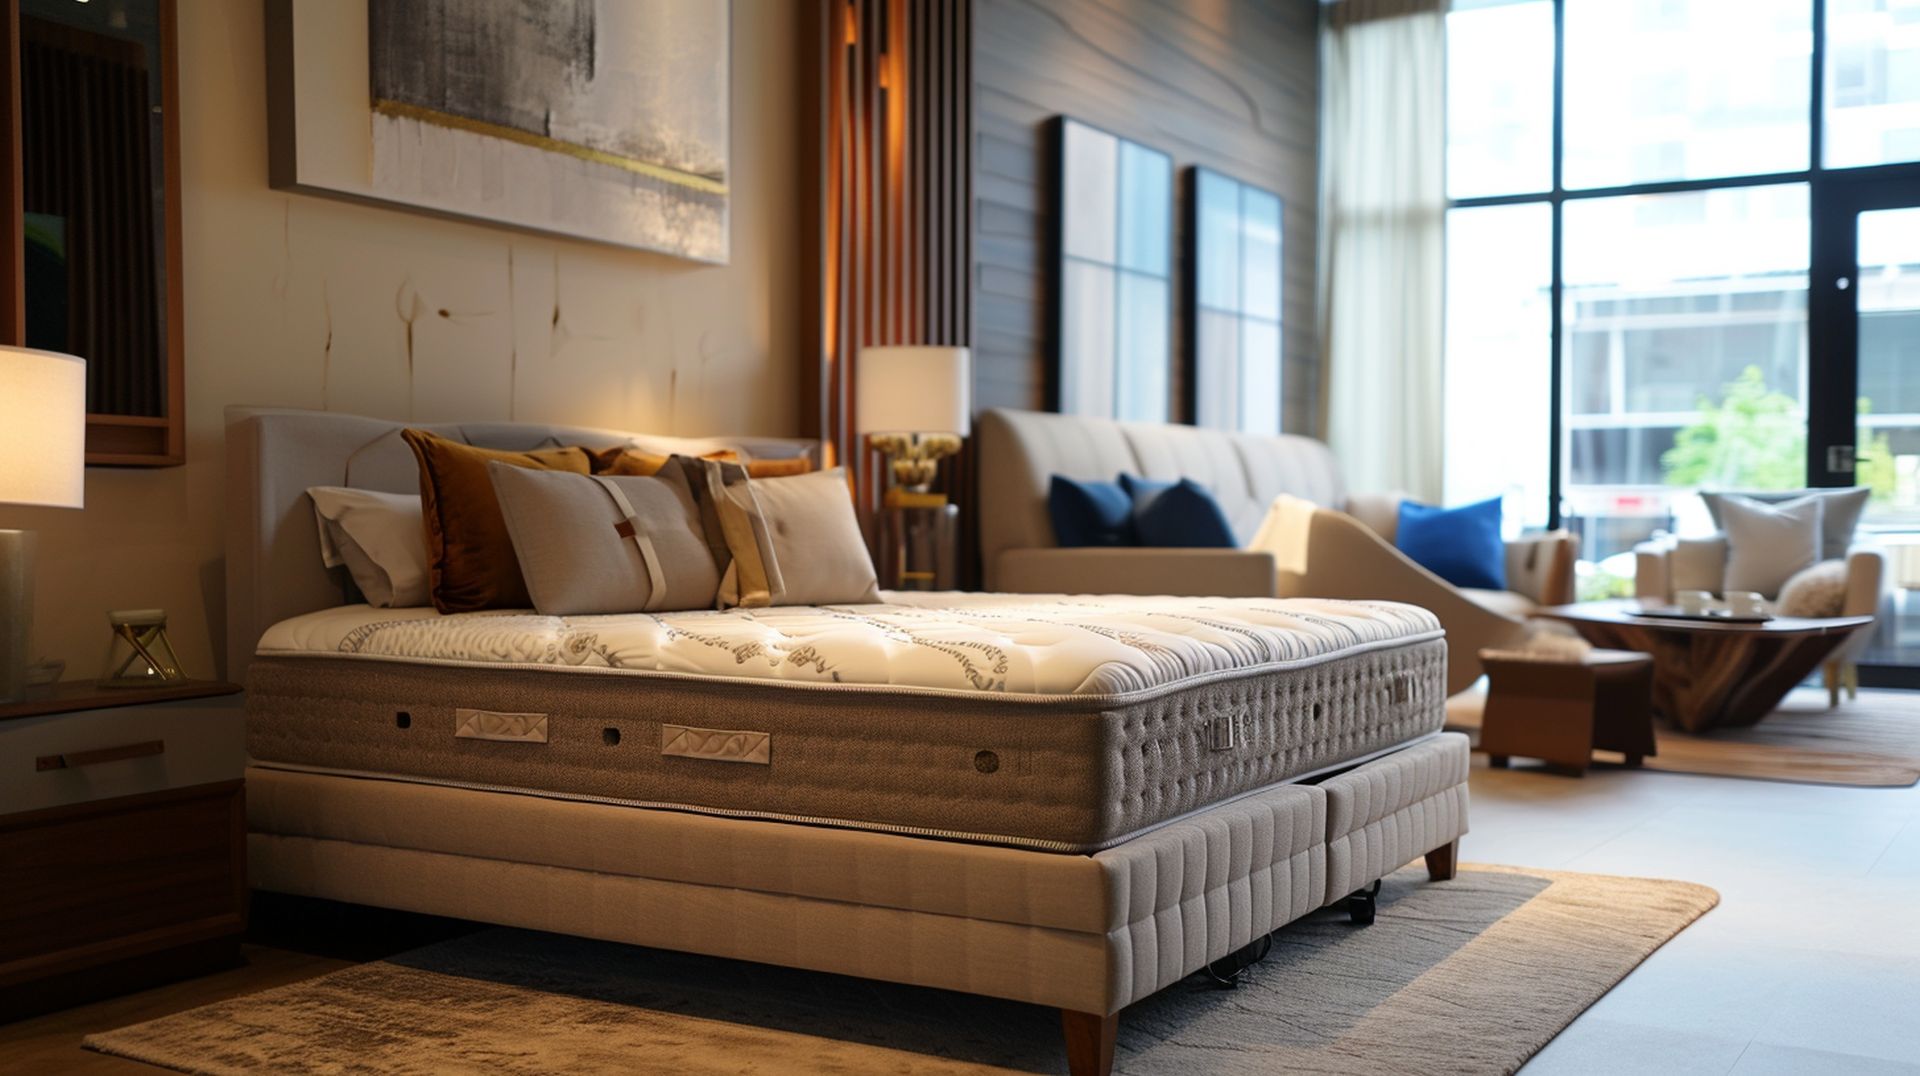 If you're looking for a new bed, mattress stores in Cincinnati offer the best customer and delivery service, financing, and warranties in Ohio